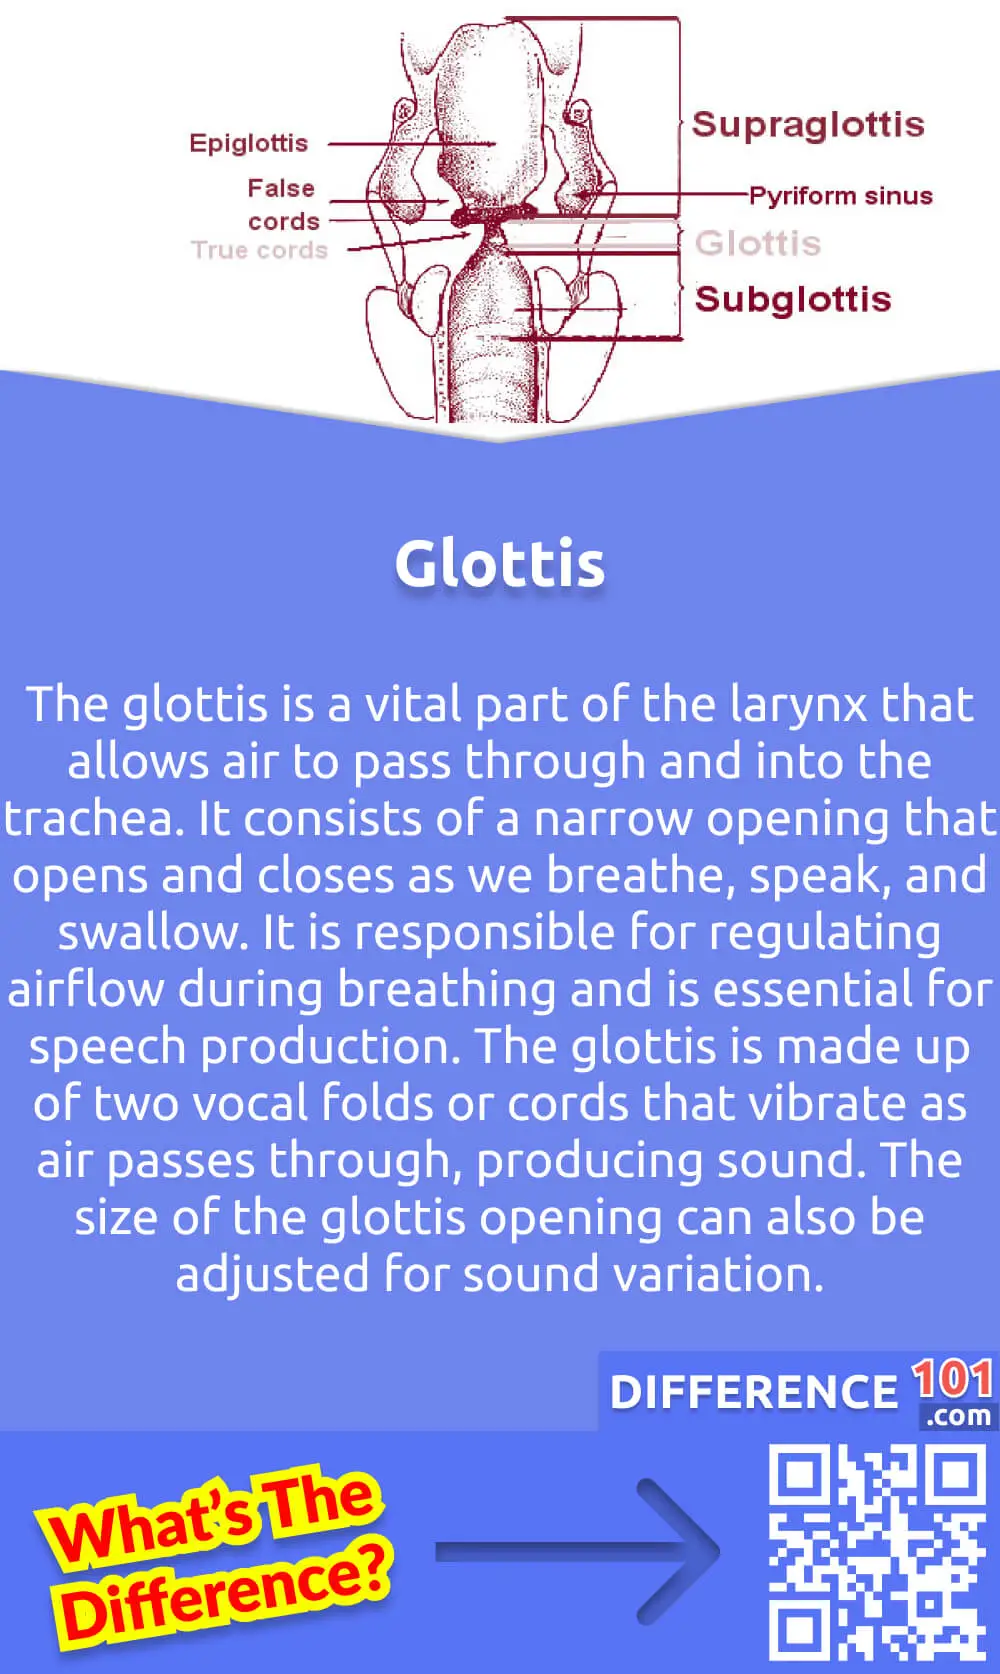 What Is Glottis? The glottis is a vital part of the larynx that allows air to pass through and into the trachea. It consists of a narrow opening that opens and closes as we breathe, speak, and swallow. It is responsible for regulating airflow during breathing and is essential for speech production. The glottis is made up of two vocal folds or cords that vibrate as air passes through, producing sound. The size of the glottis opening can also be adjusted for sound variation. Malfunction of the glottis due to disease or injury can lead to respiratory distress or speech problems. Thus, it is important to be mindful of its function and potential problems that could arise.
